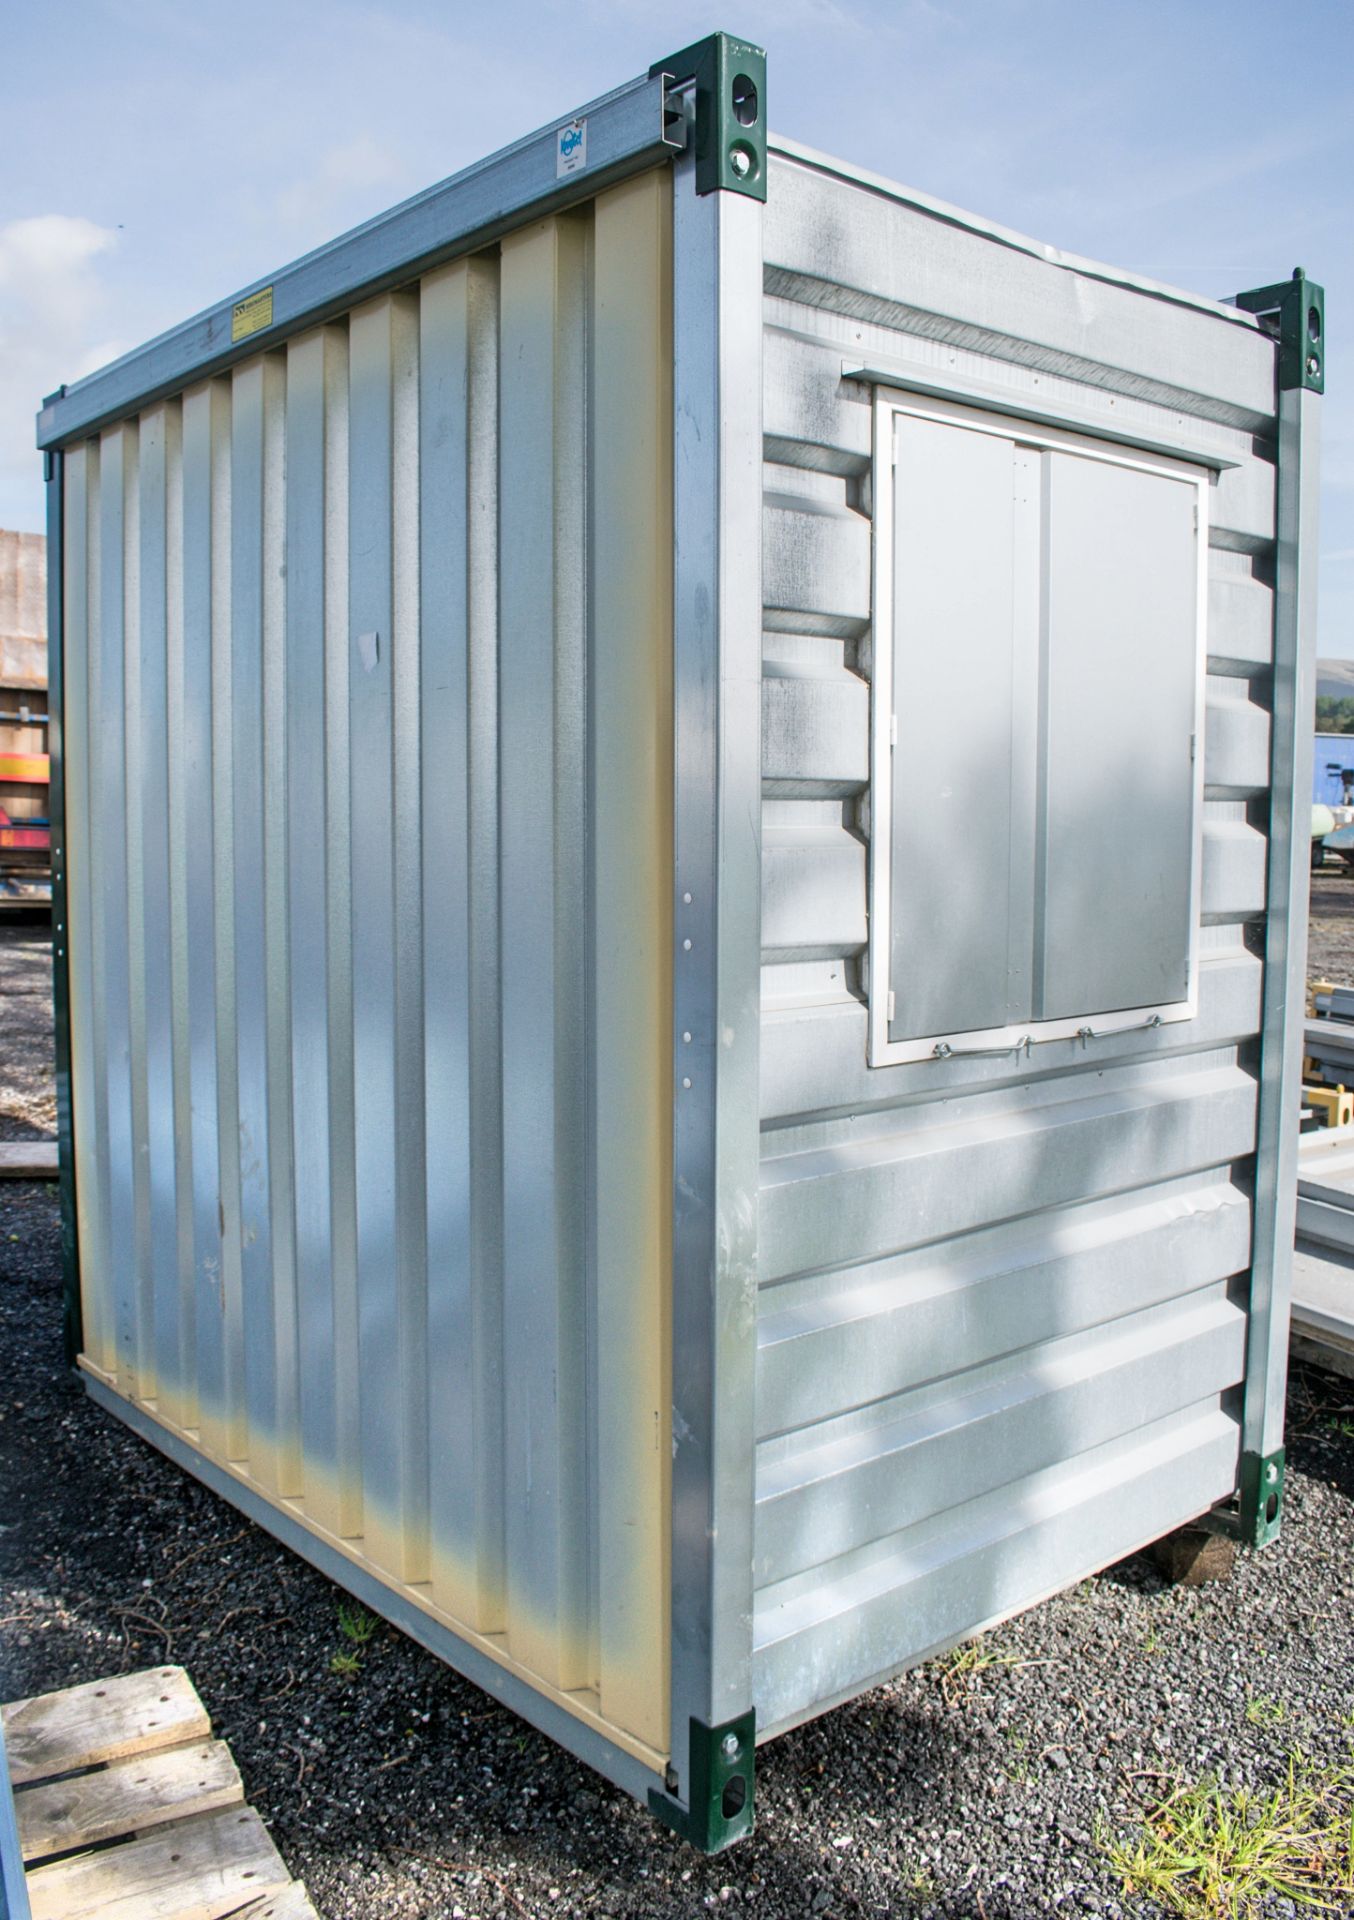 KOVOBEL 2.1 M X 1.4 M collapsible steel storage container (Built up) - Image 2 of 2